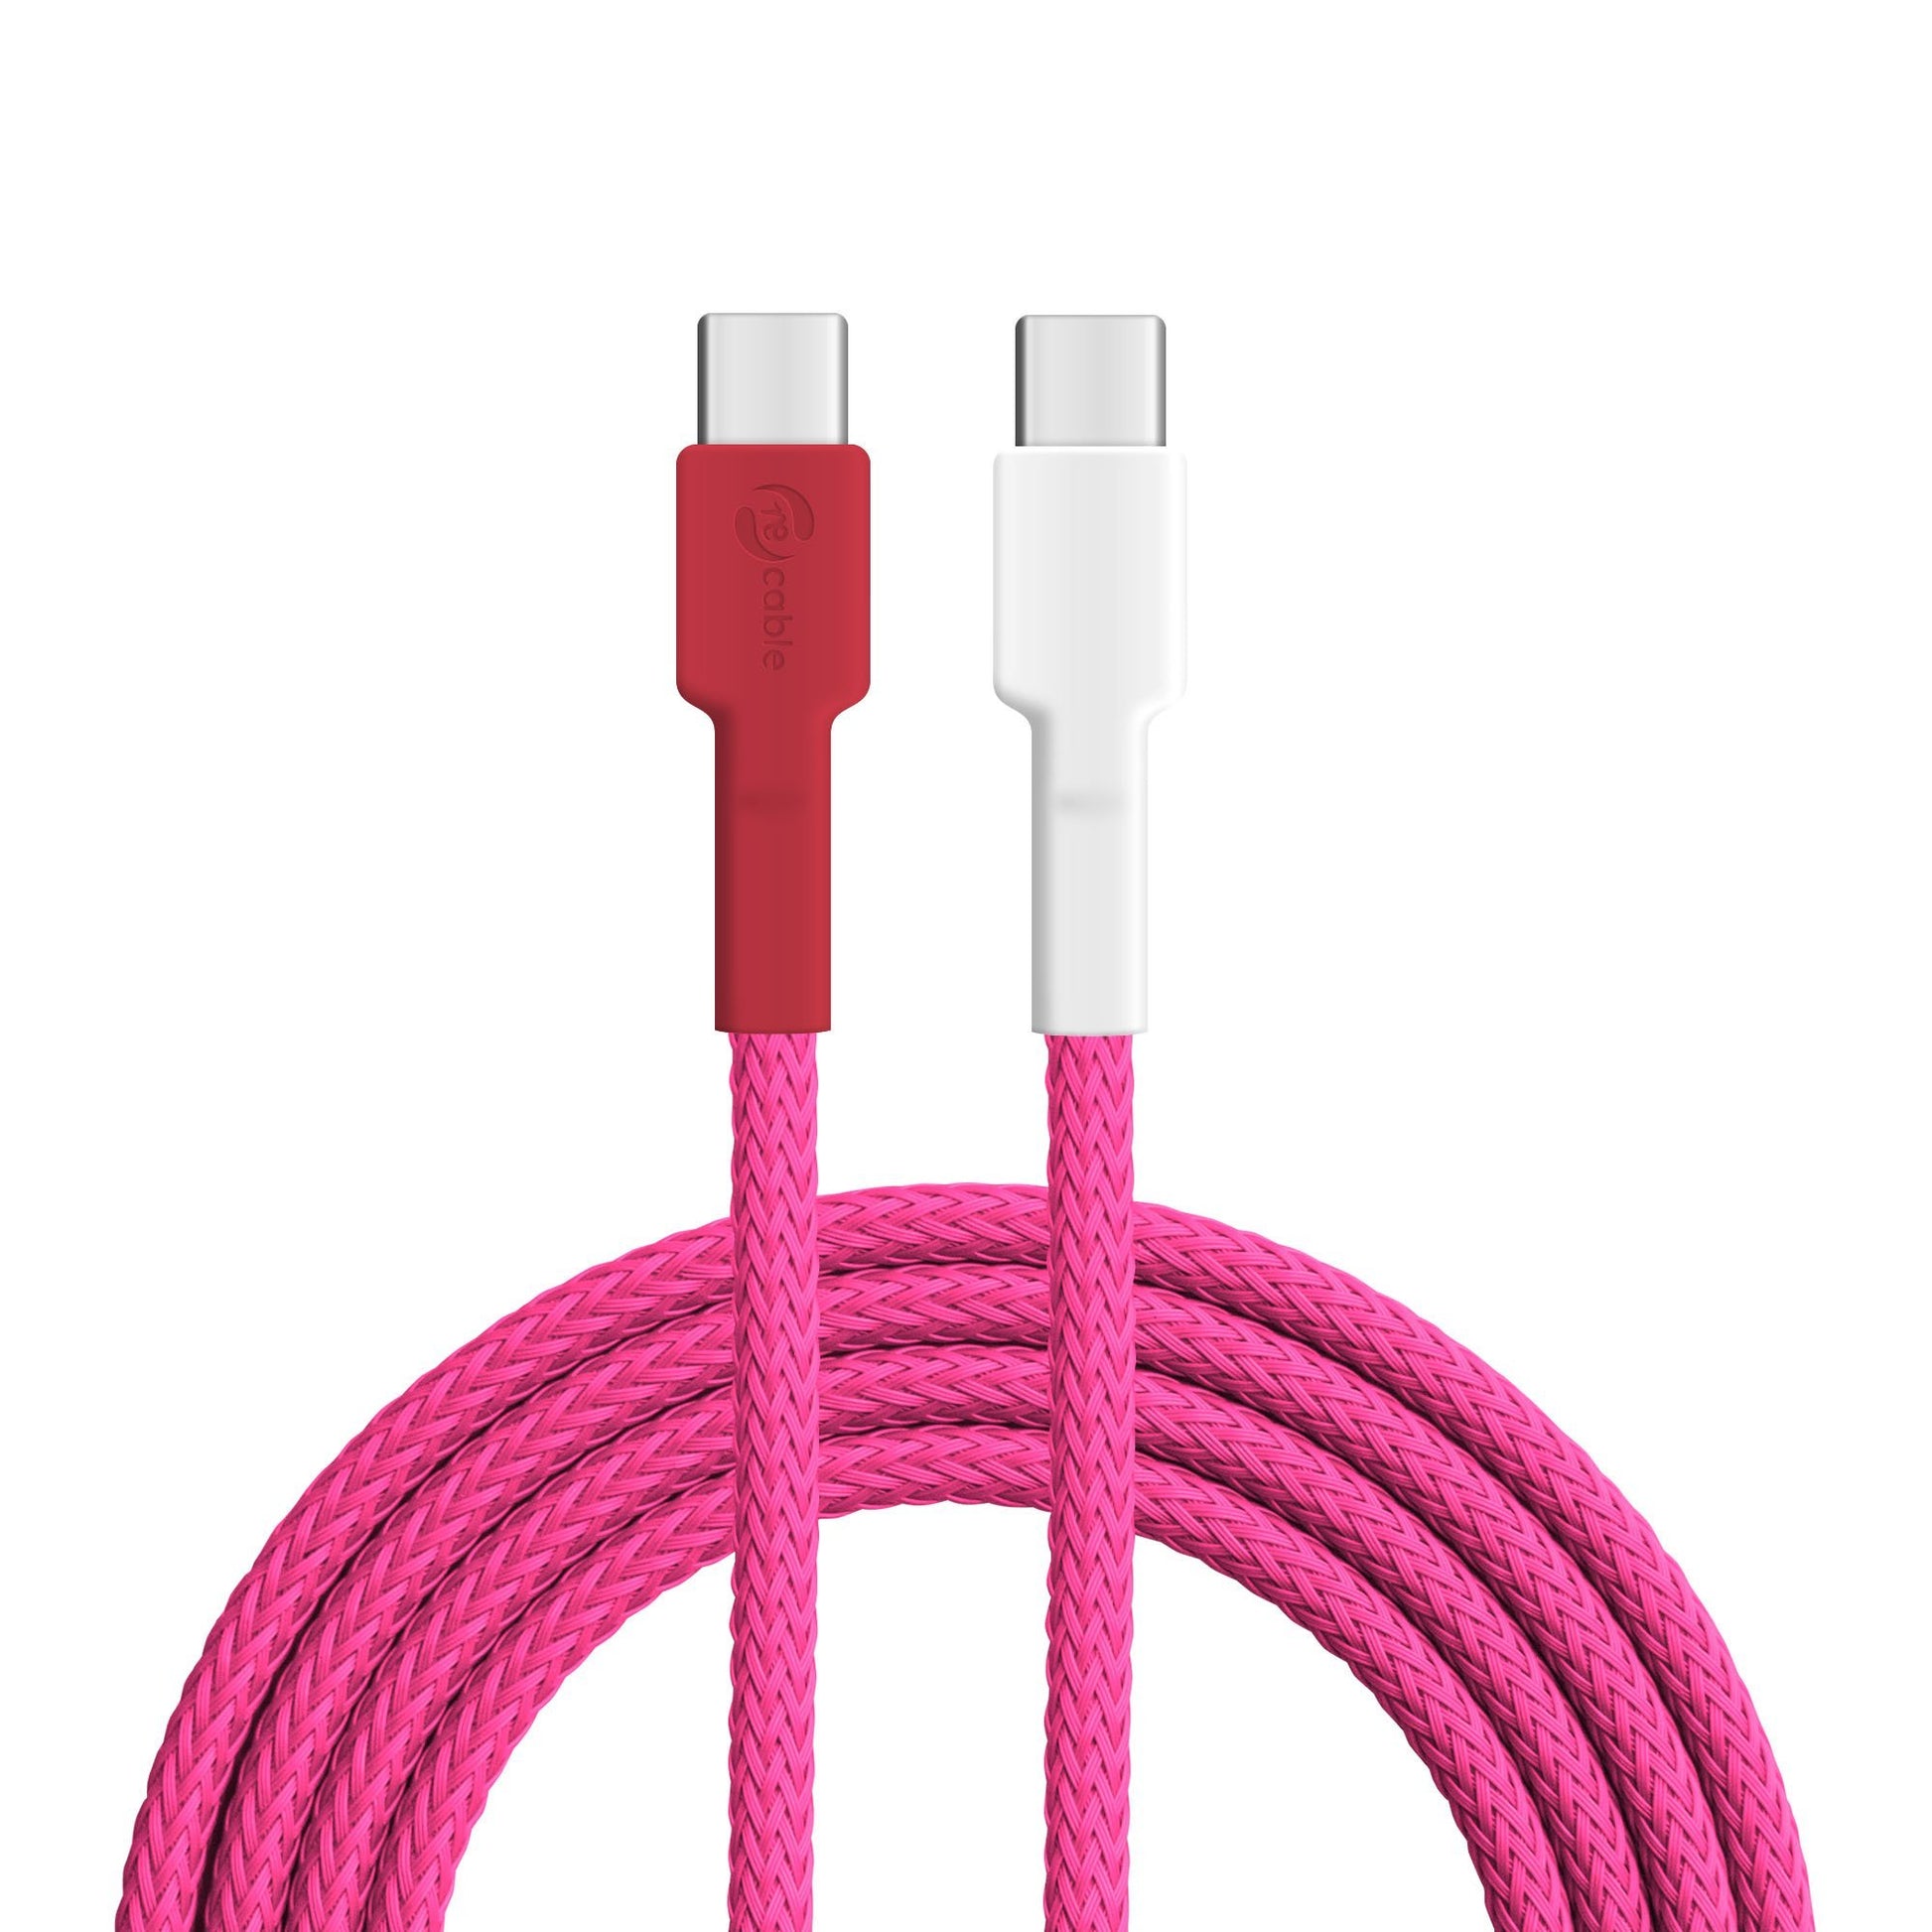 sustainable USB charging cable, fair & made in Germany